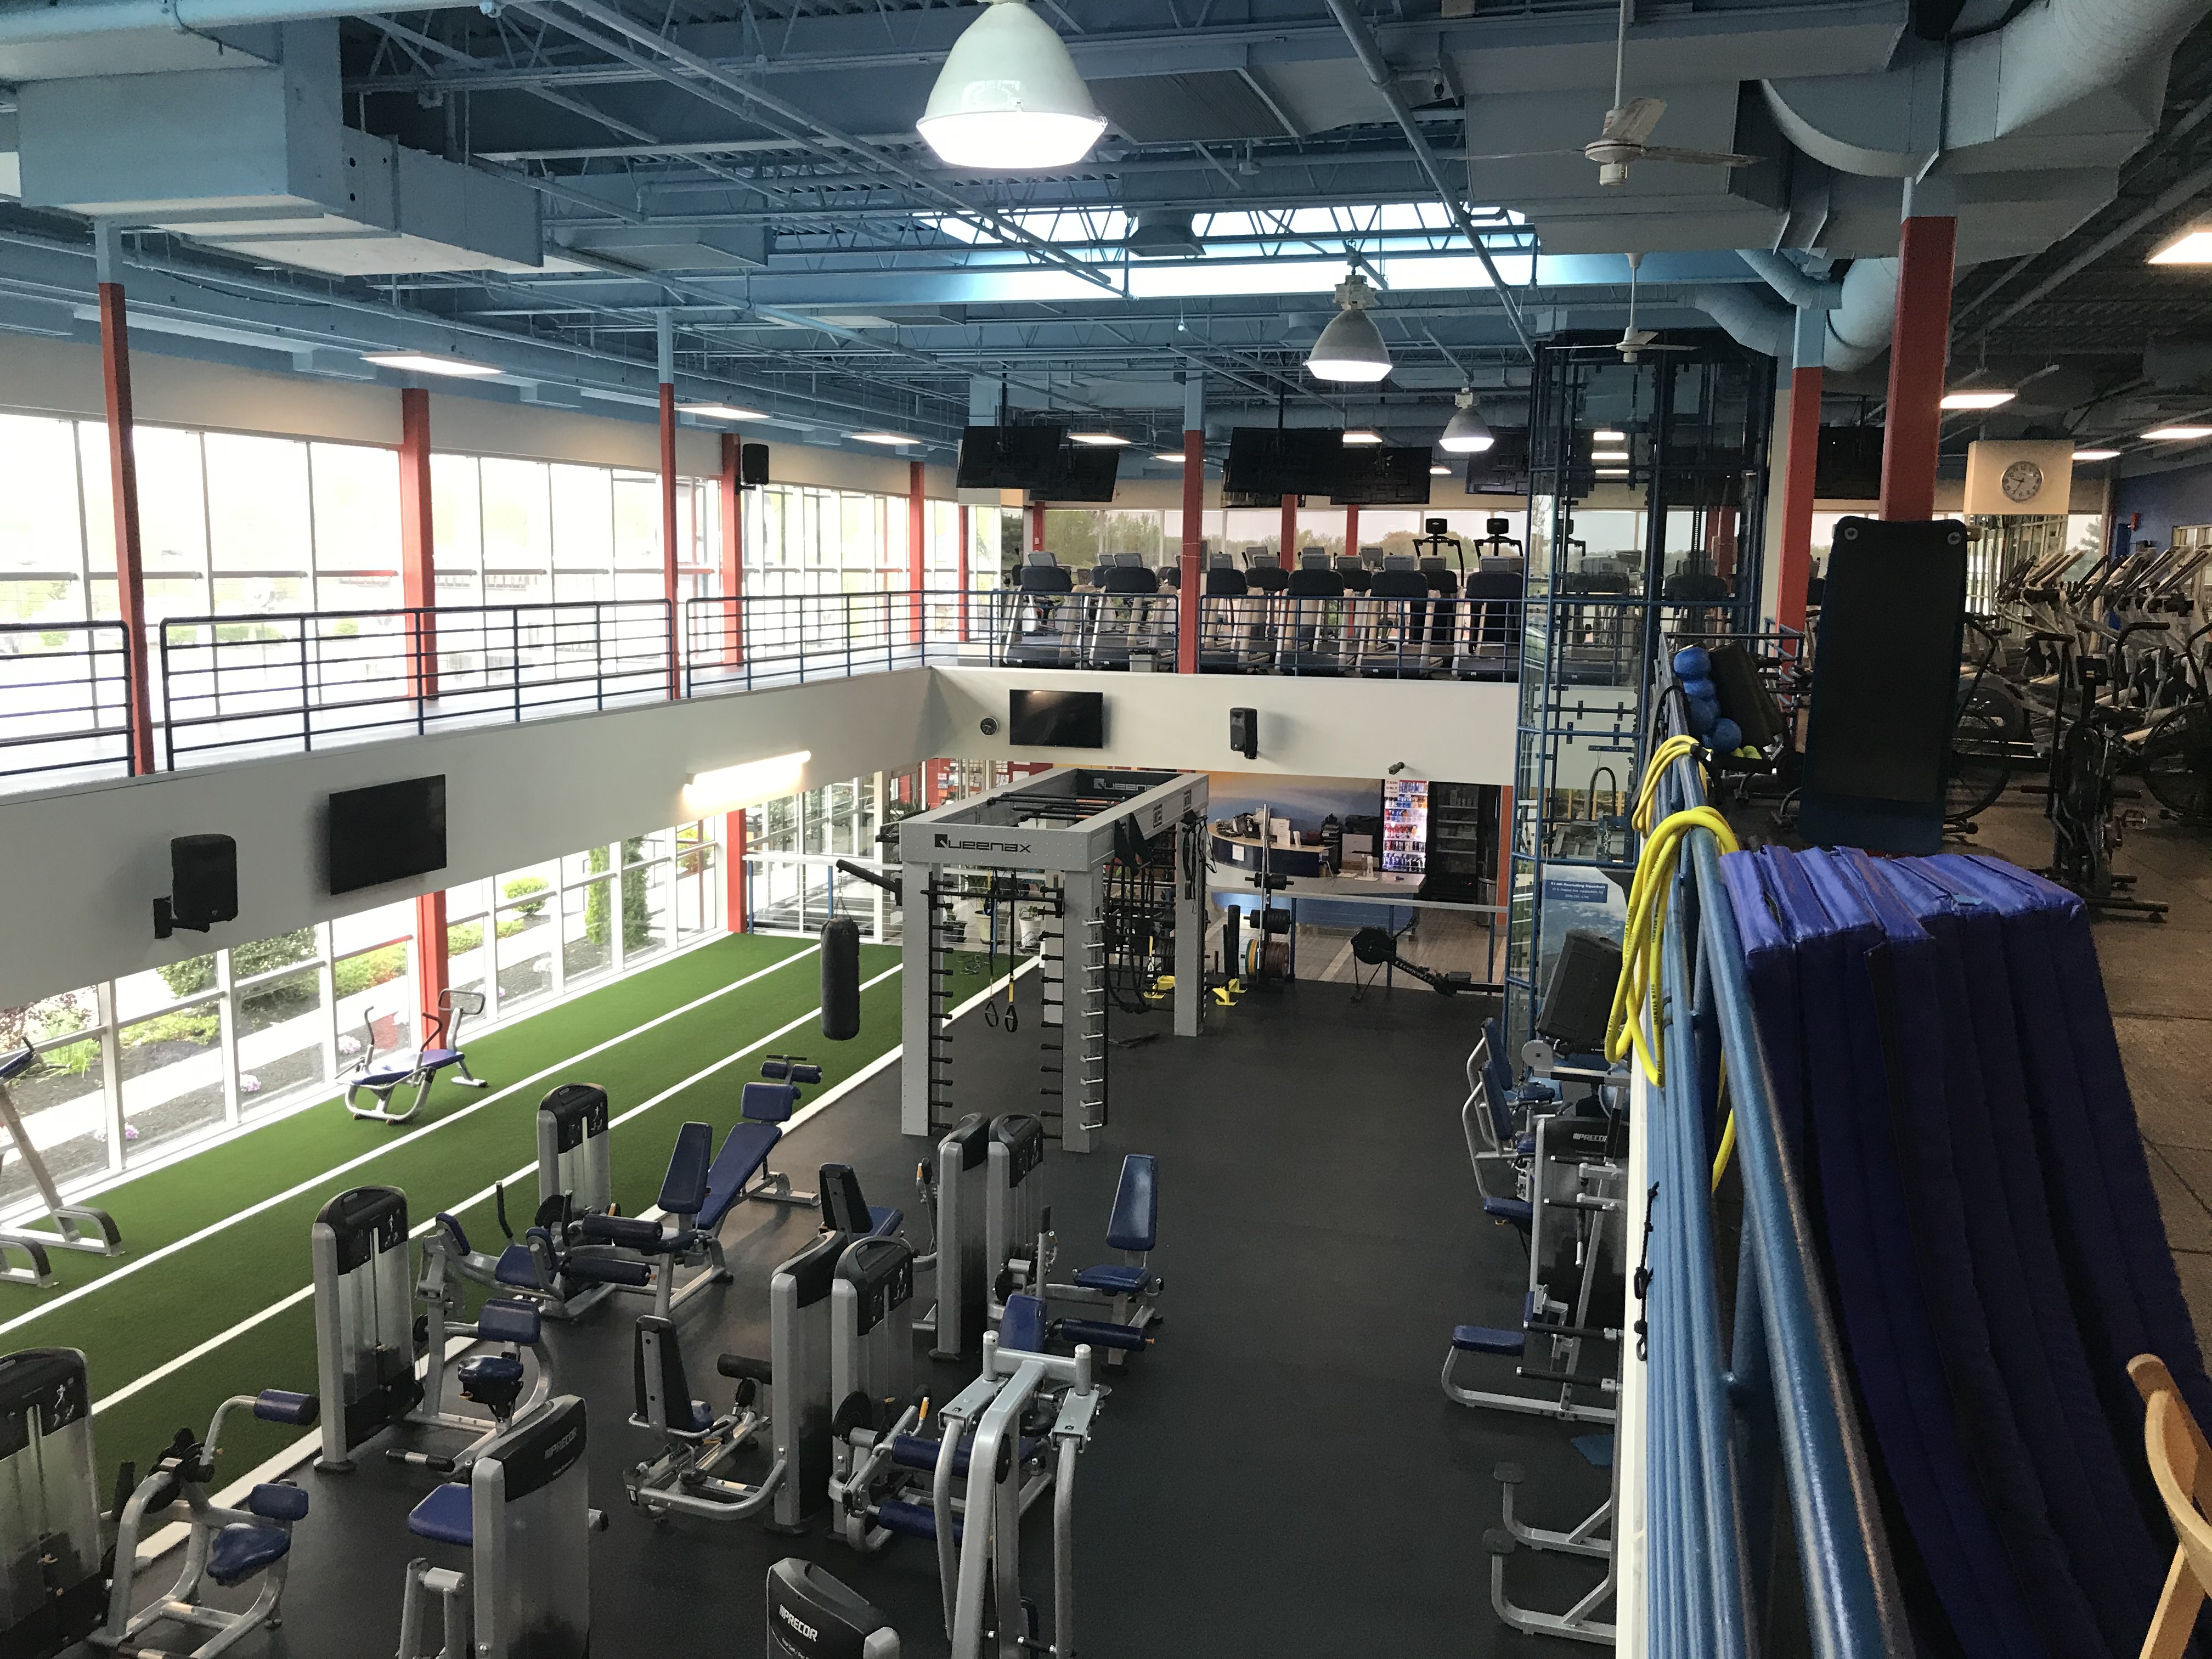 South Jersey's Voted Best Gym Three Years in a Row Launches 3 New